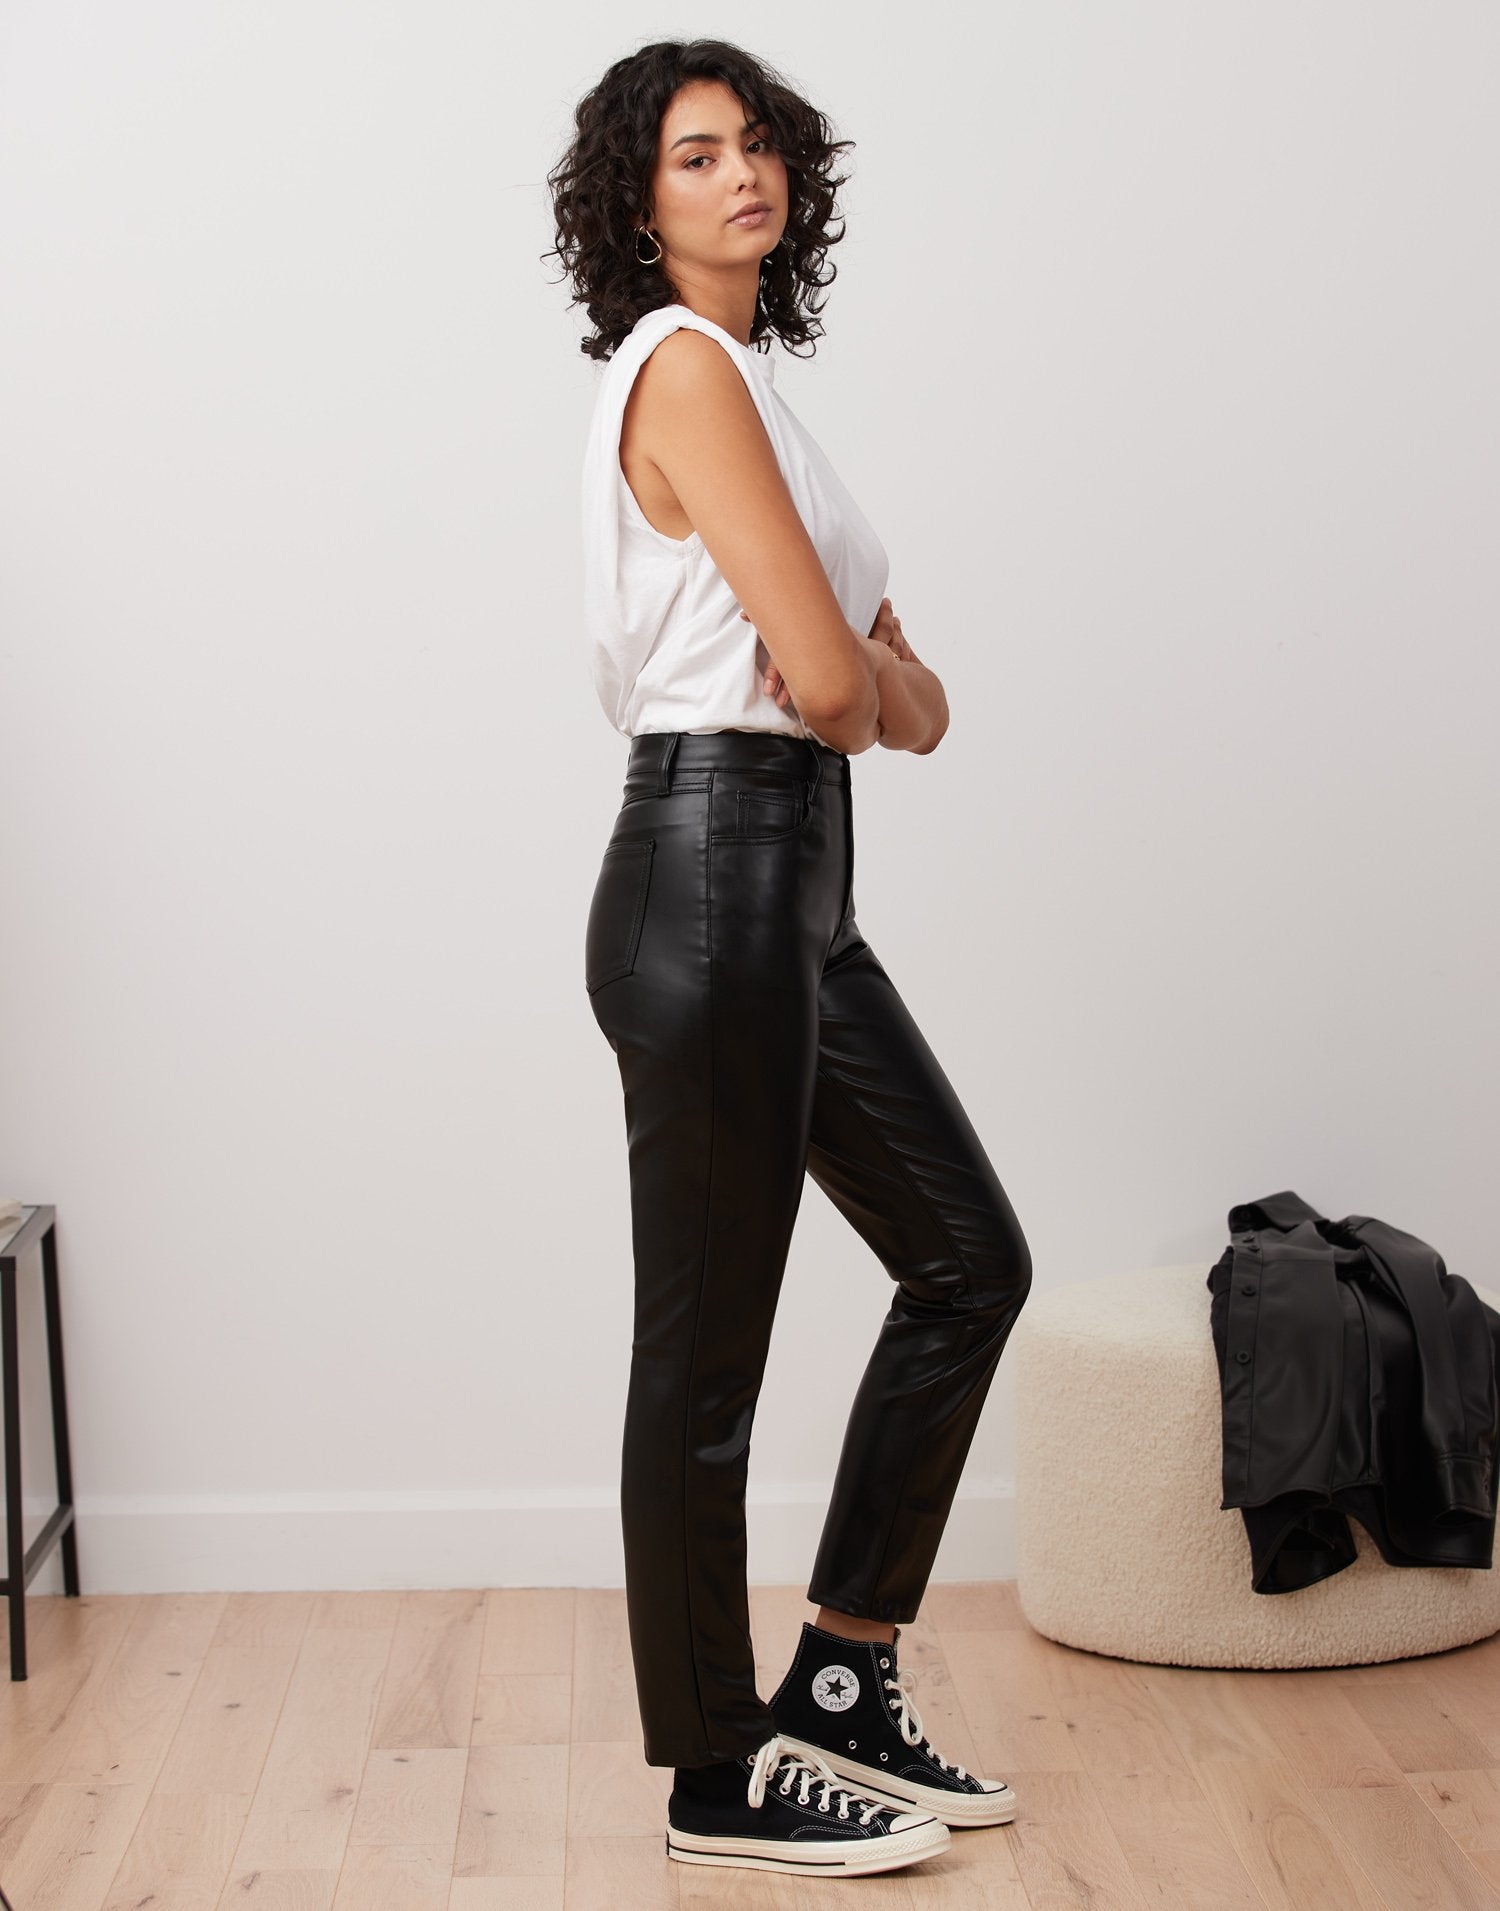 Clothing & Shoes - Bottoms - Leggings - Marallis Pull On Leather